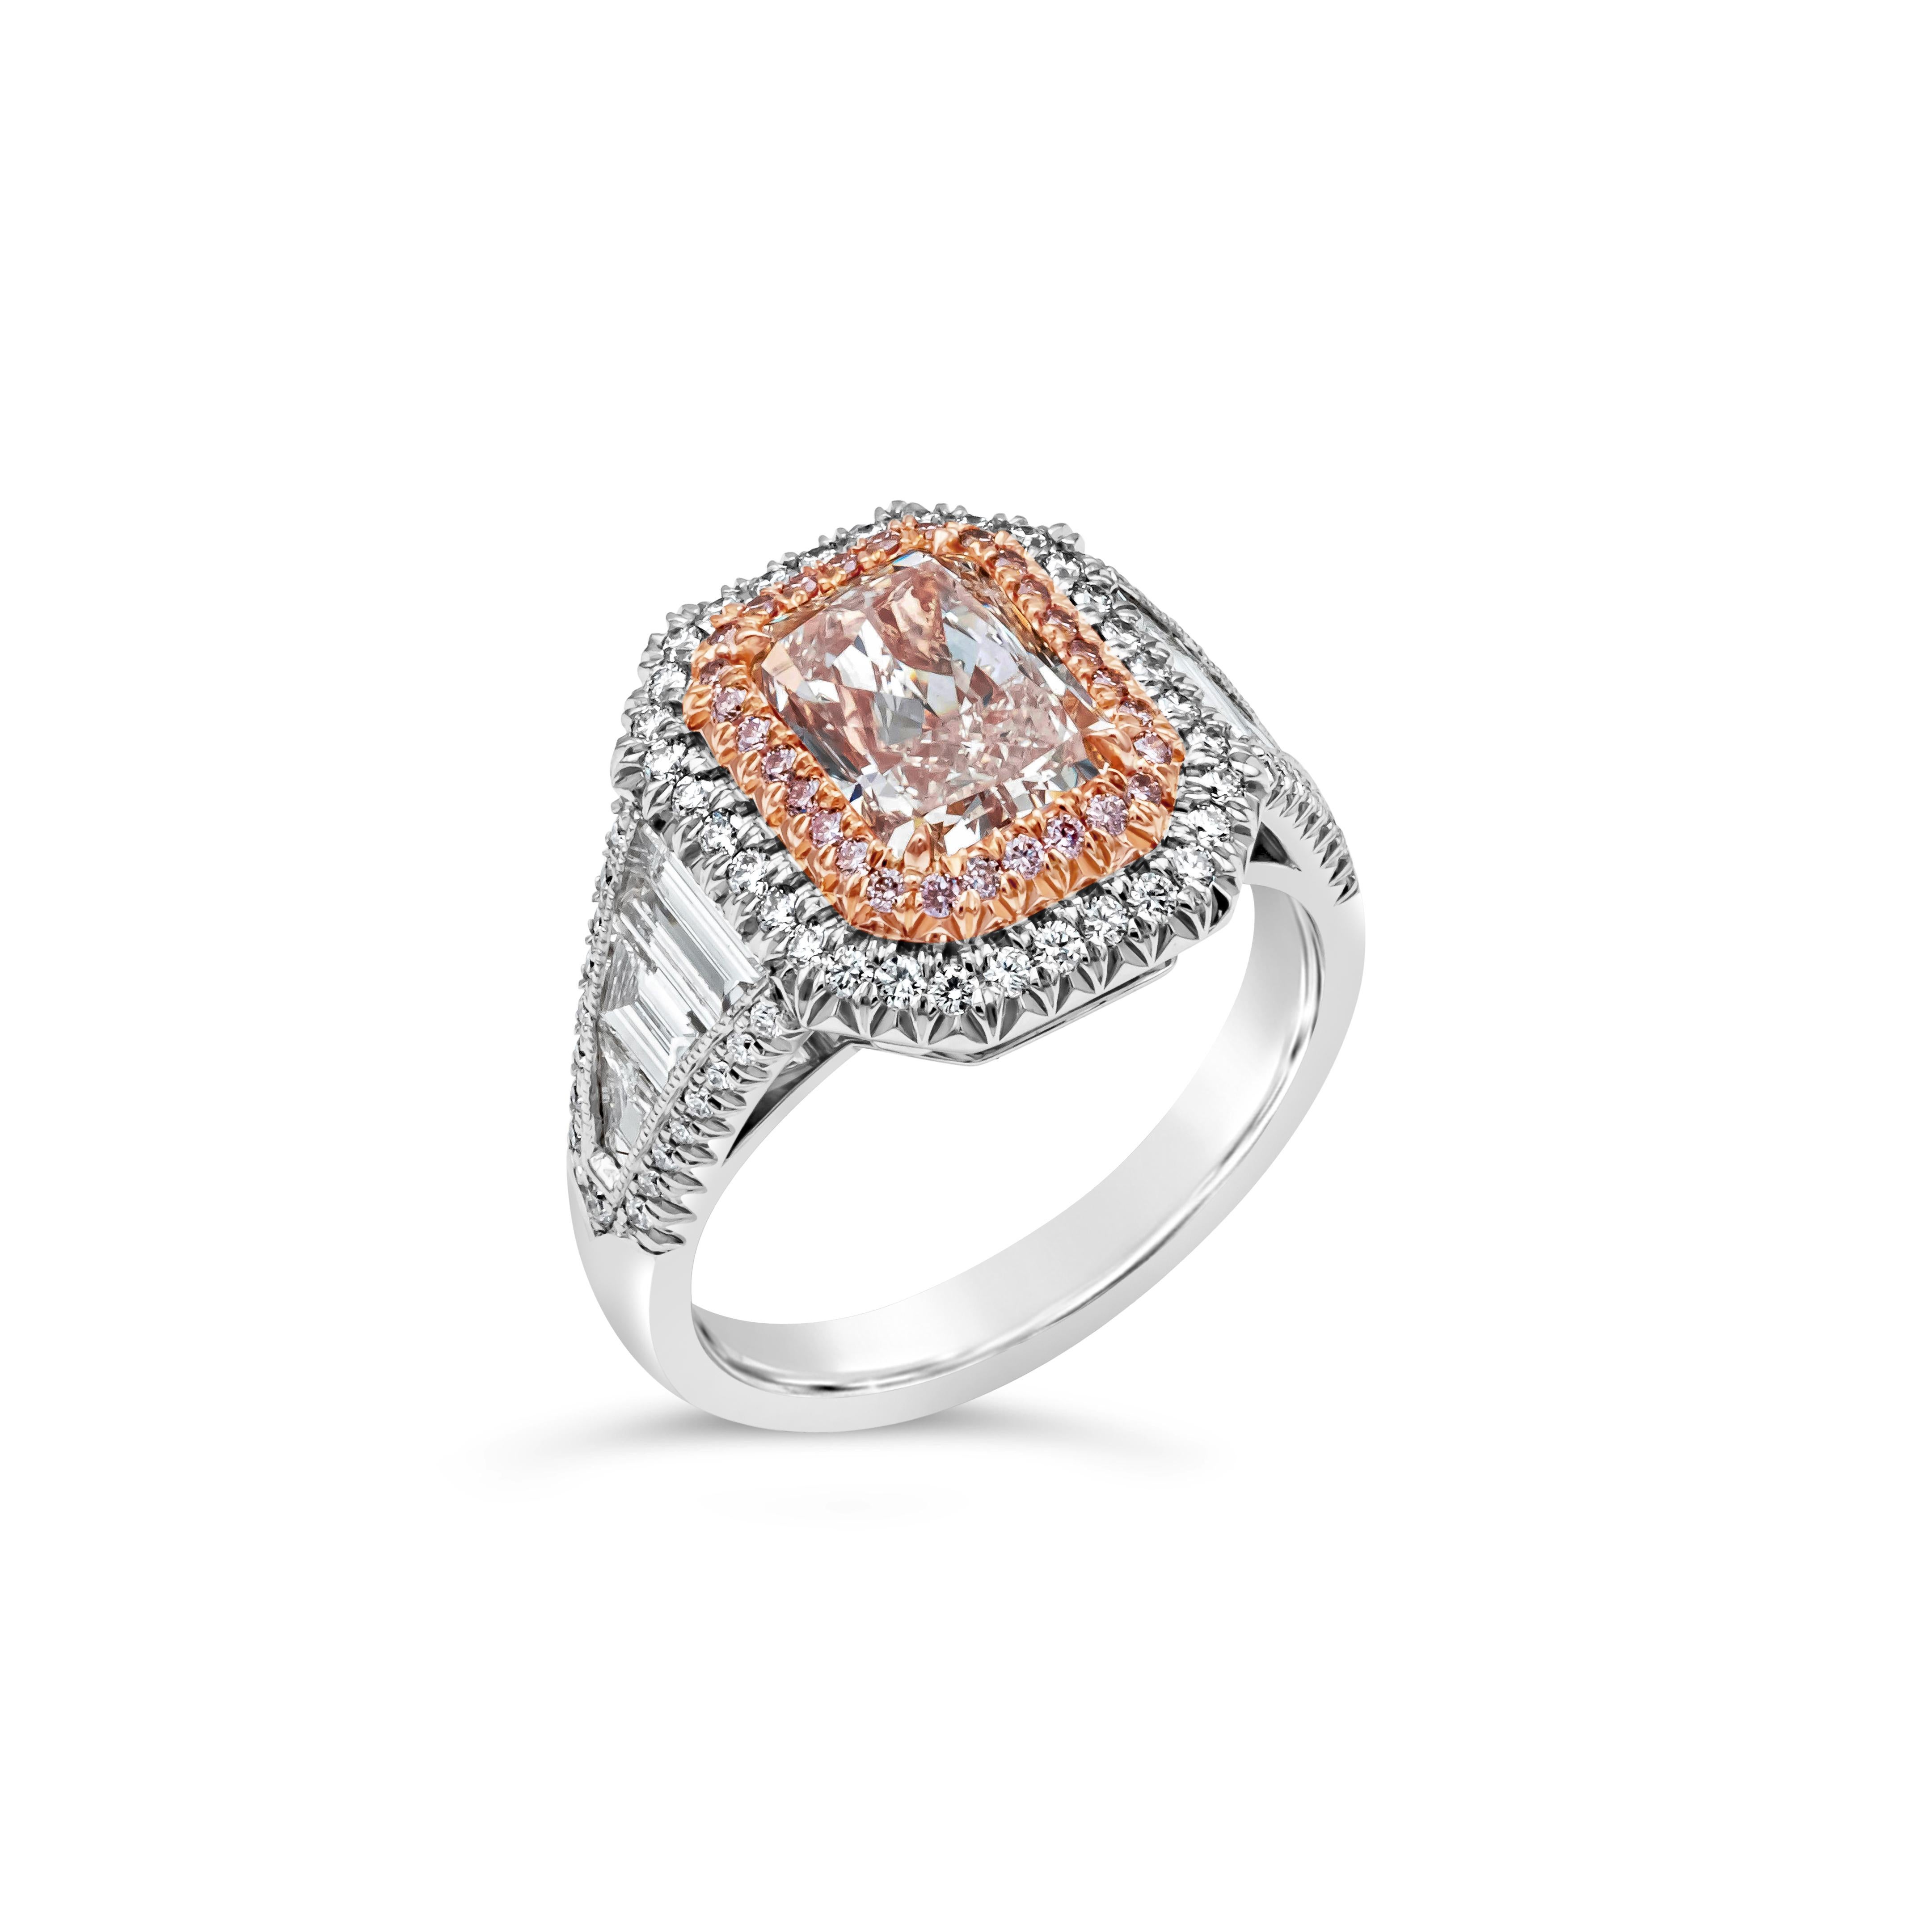 This beautiful and rare 2.01 carat radiant cut diamond certified by GIA as light brownish pink color, SI2 clarity. Center diamond is set in a double halo setting set with pink and white diamonds. Made in 18k rose gold and platinum. Accent pink